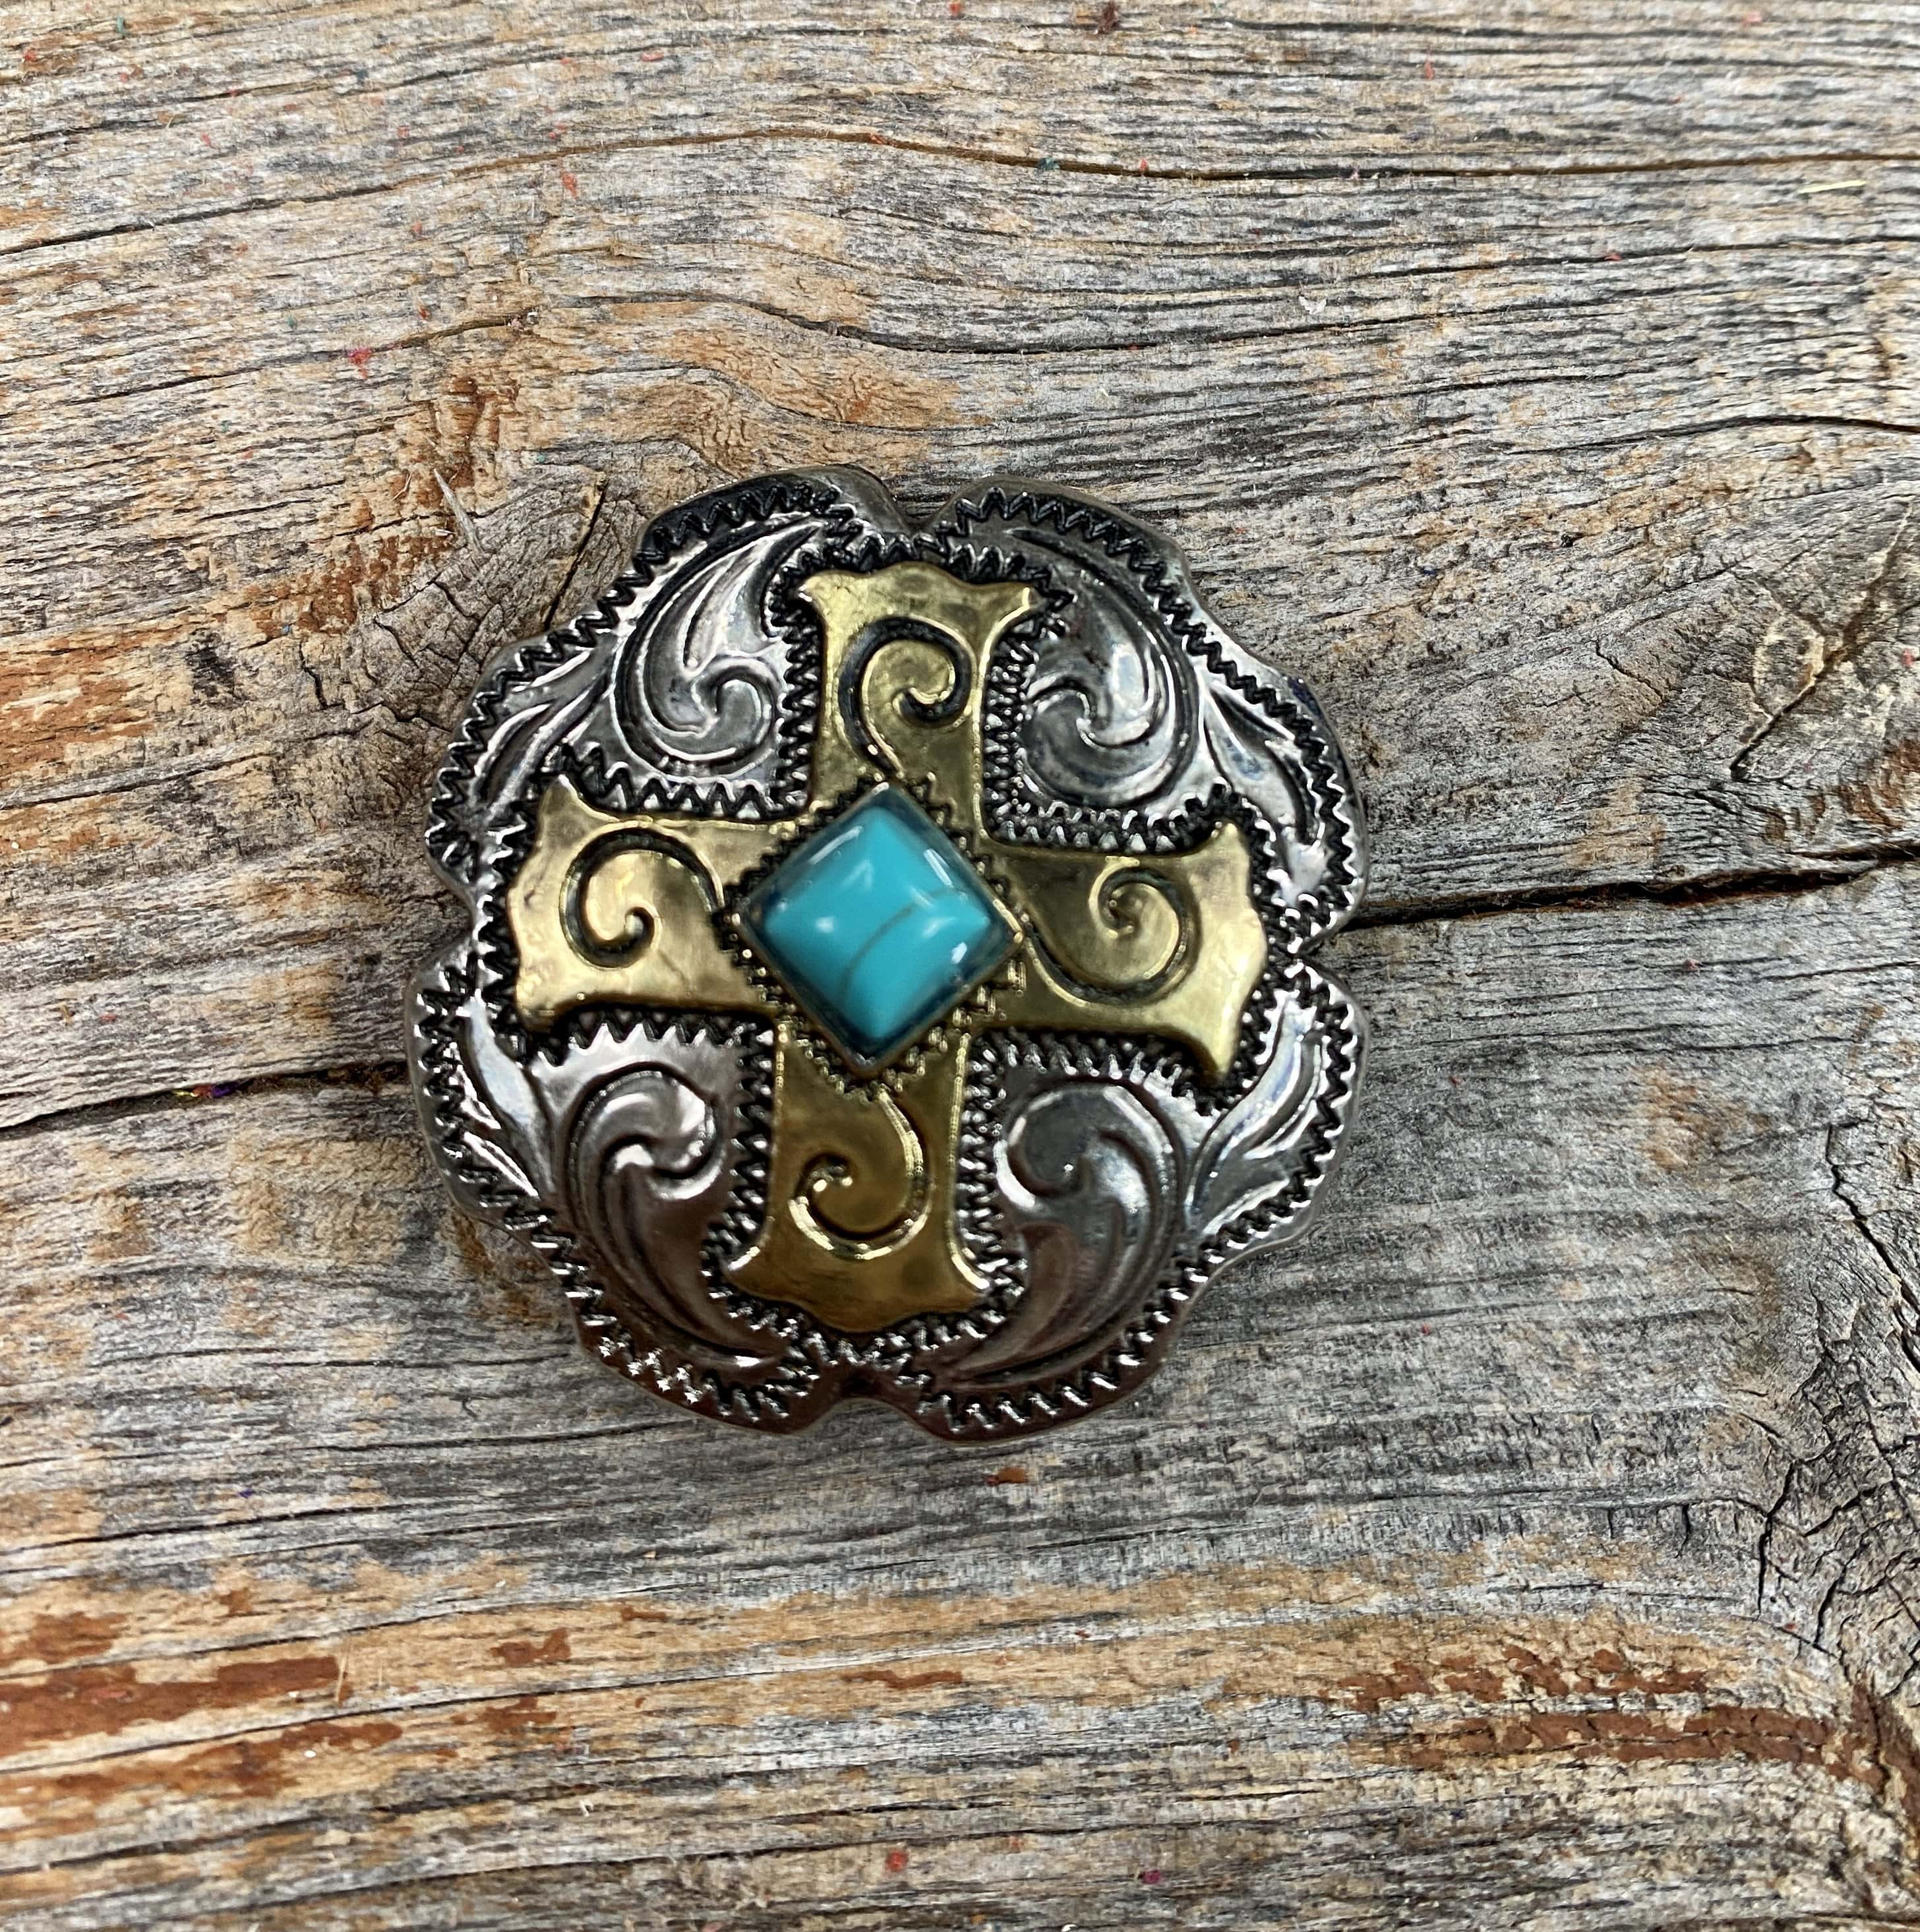 Shiny Silver and Gold Cross Conchos - Tack Wholesale